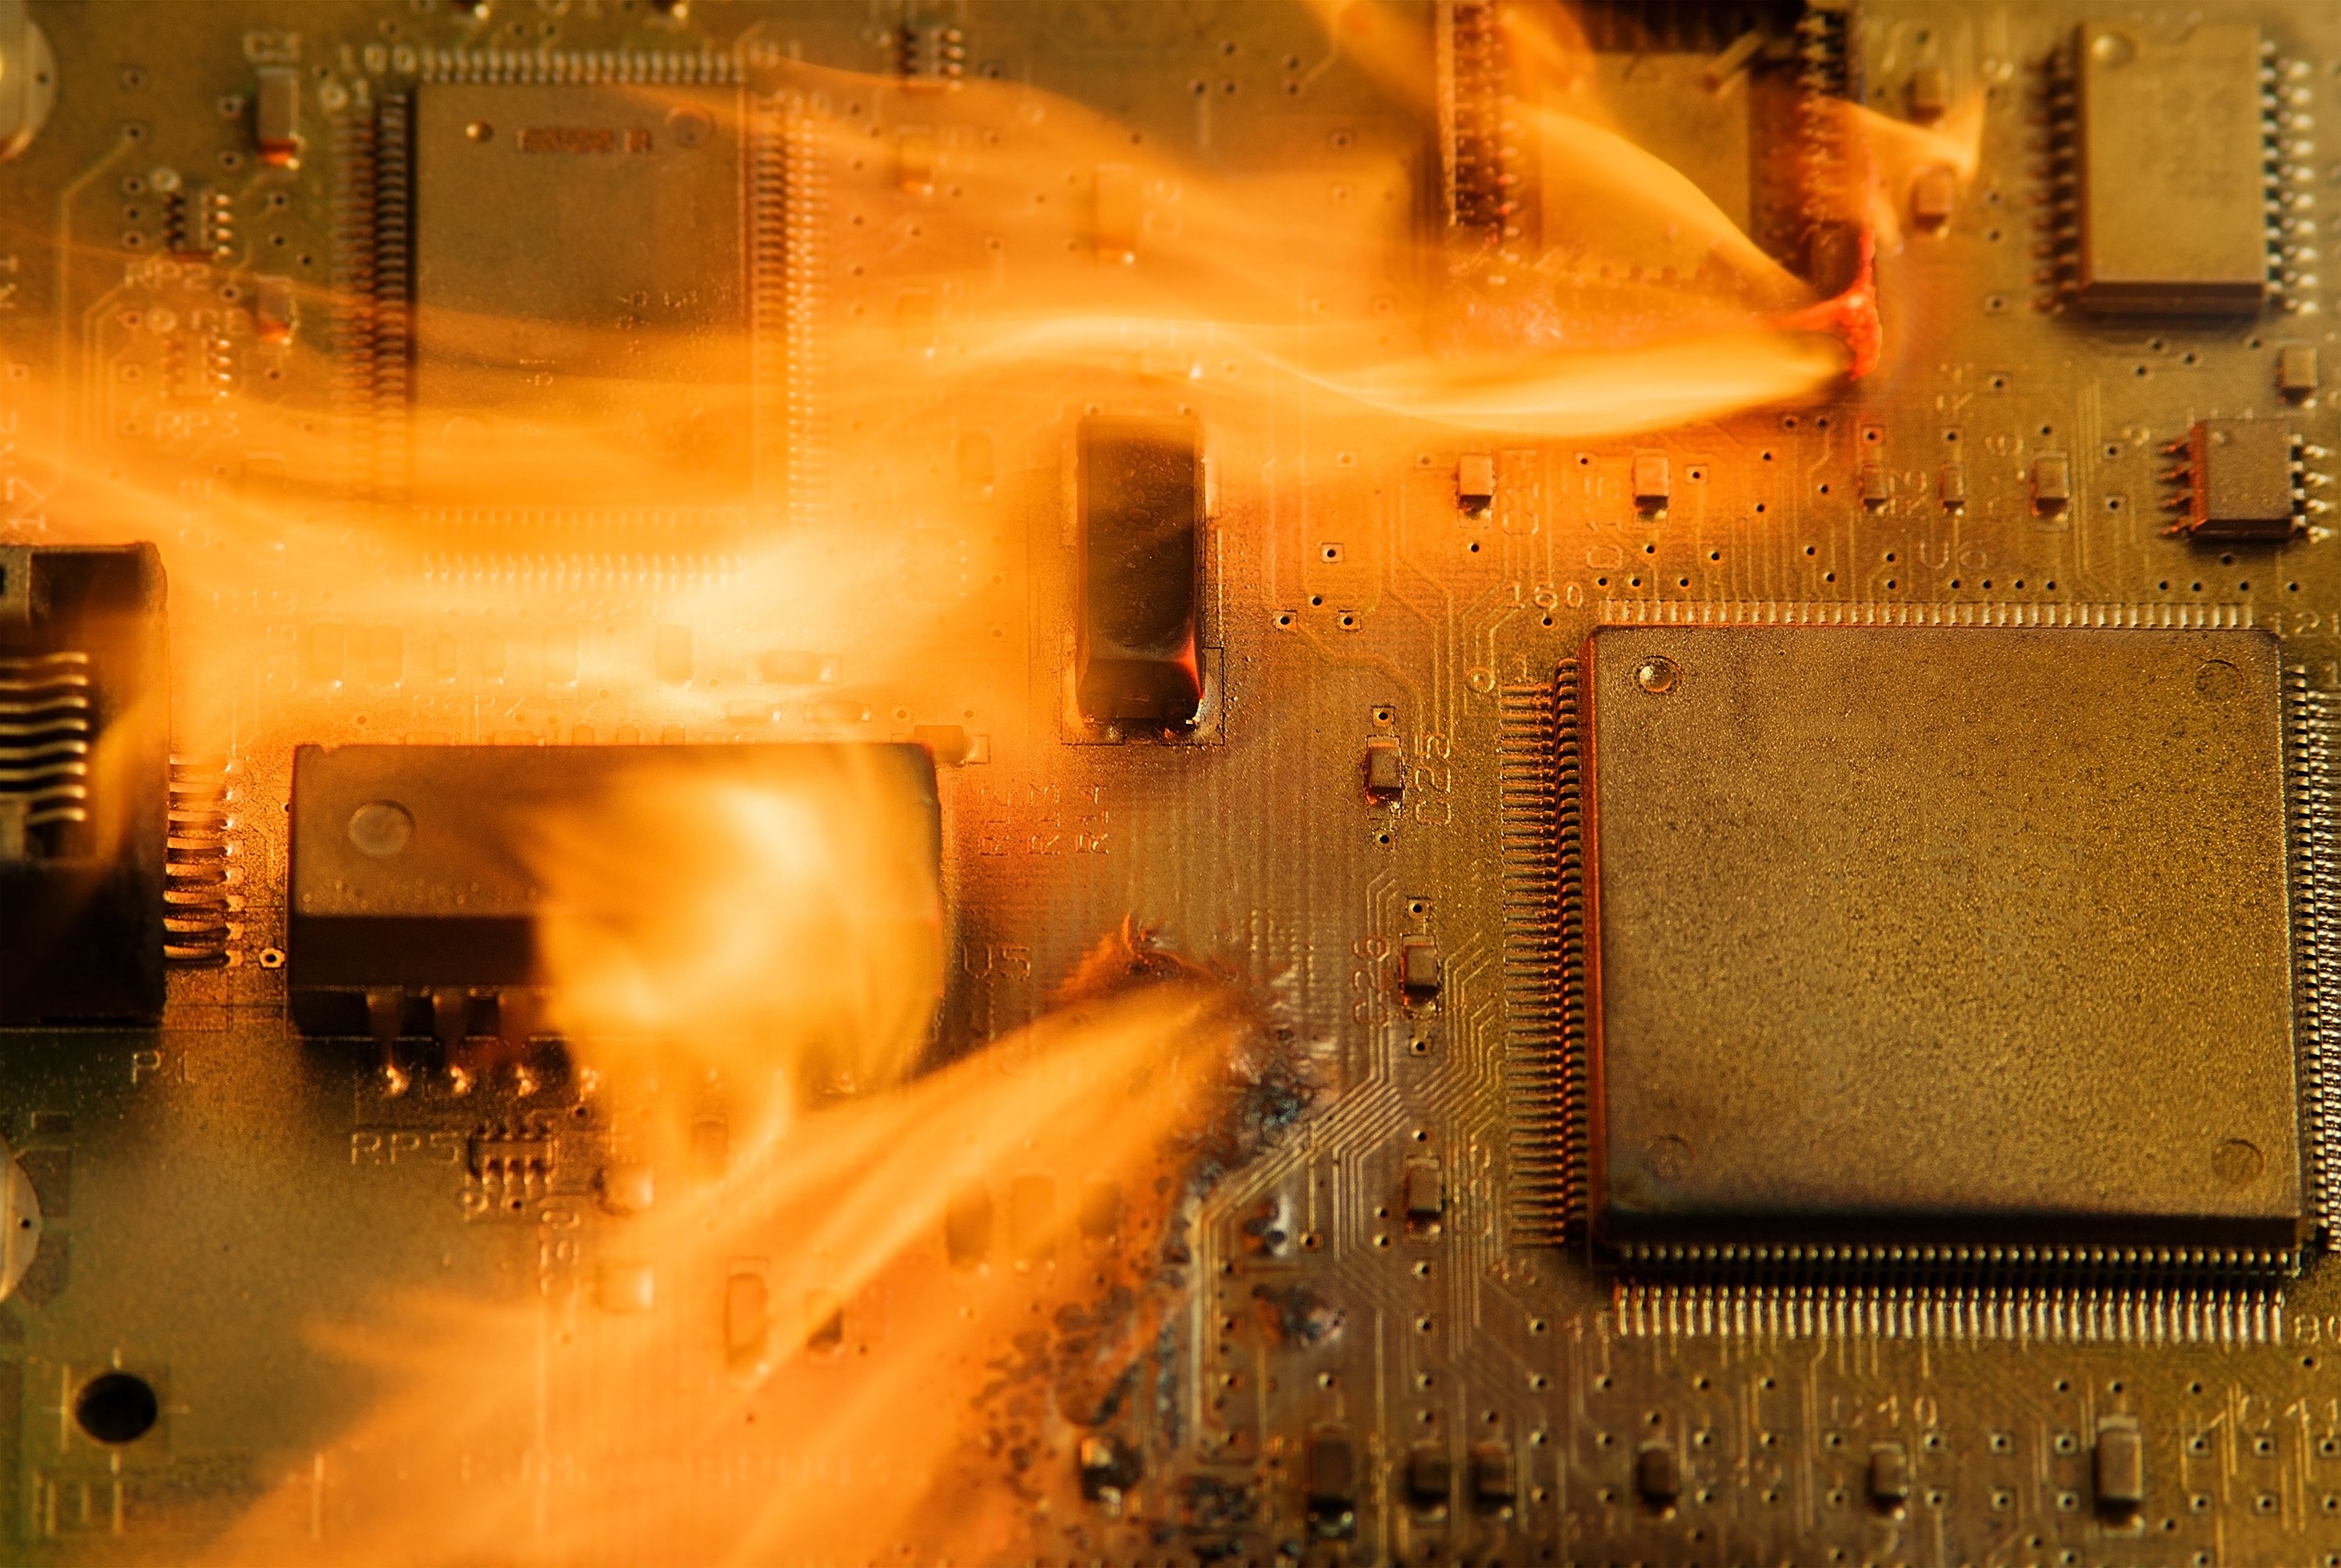 Microchips burning on a printed circuit board.